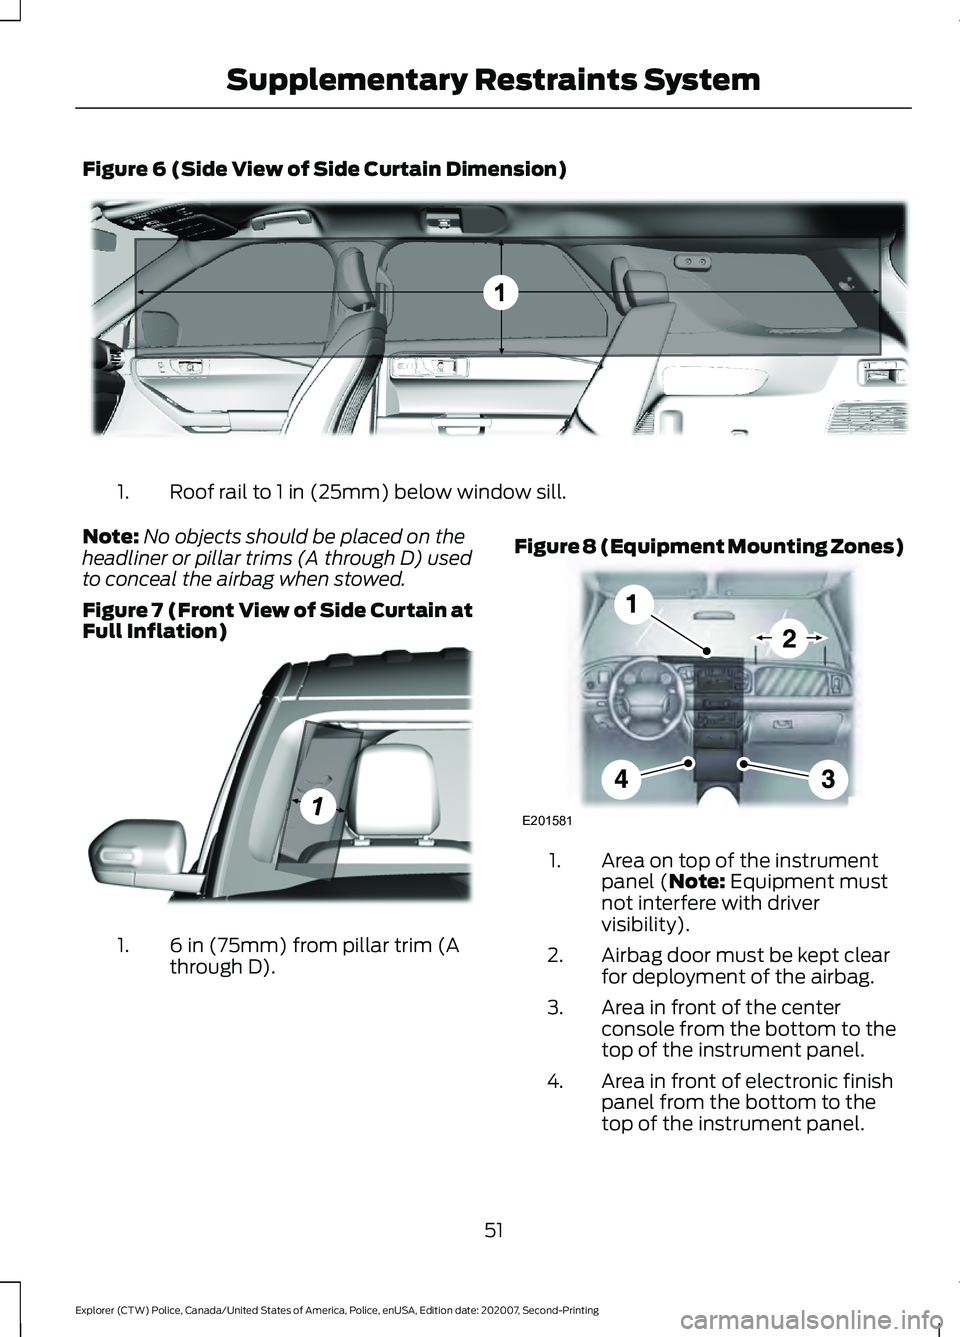 FORD POLICE INTERCEPTOR 2021  Owners Manual Figure 6 (Side View of Side Curtain Dimension)
Roof rail to 1 in (25mm) below window sill.
1.
Note: No objects should be placed on the
headliner or pillar trims (A through D) used
to conceal the airba